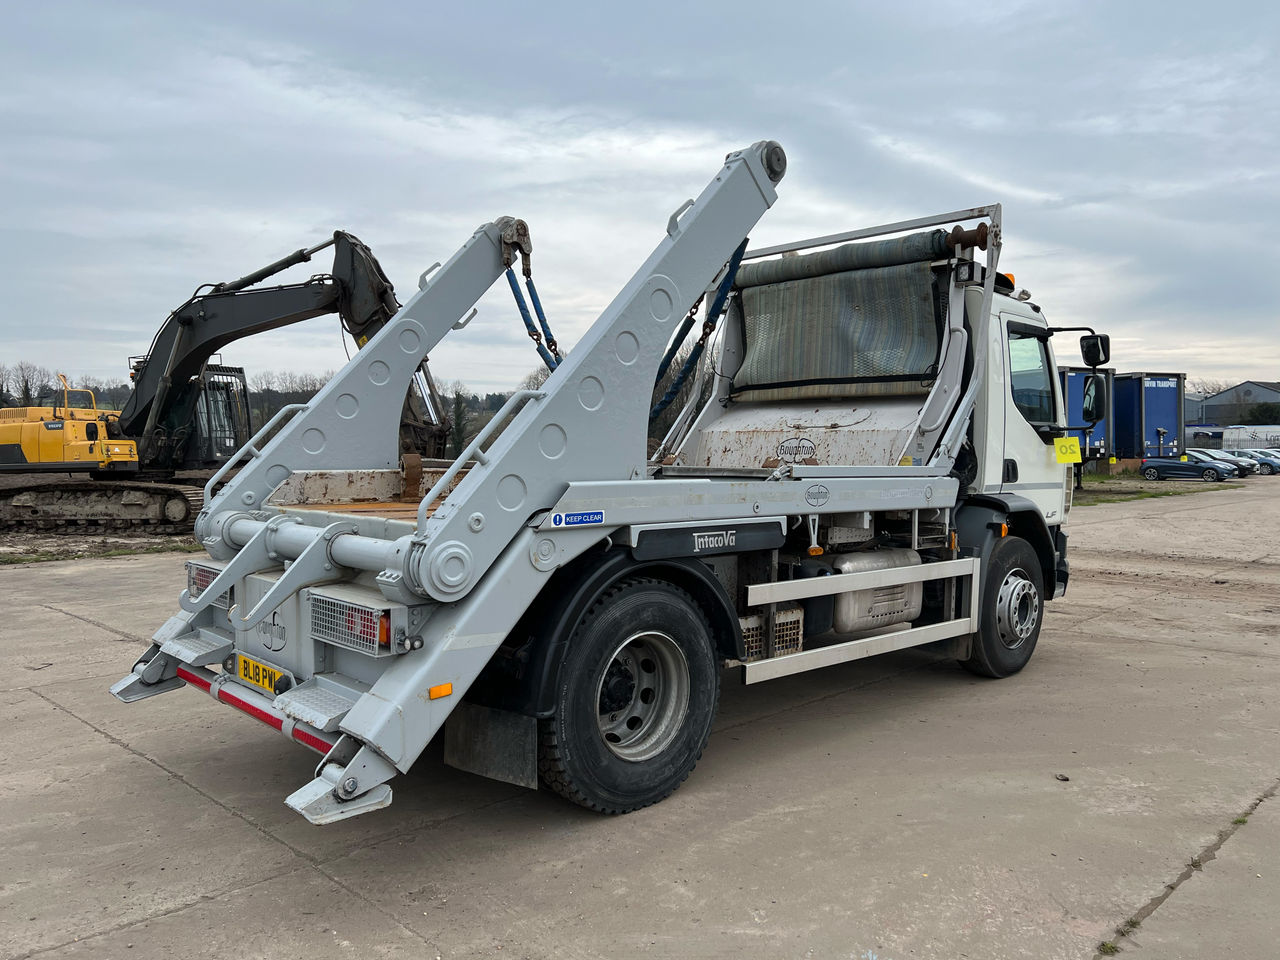 Ready to go DAF LF 260, Skip Loader, 260, 18 Tonne, Day Cab, Manual, Kelsa Hi-Bar, Cab Sunvisor , Rear Light Guards, Skip Stays, Conspicuity tape, , Boughton, - | for sale at MV Commercial, the UKs leading Truck, Trailers and Van supplier. (BL18PWL 98239)